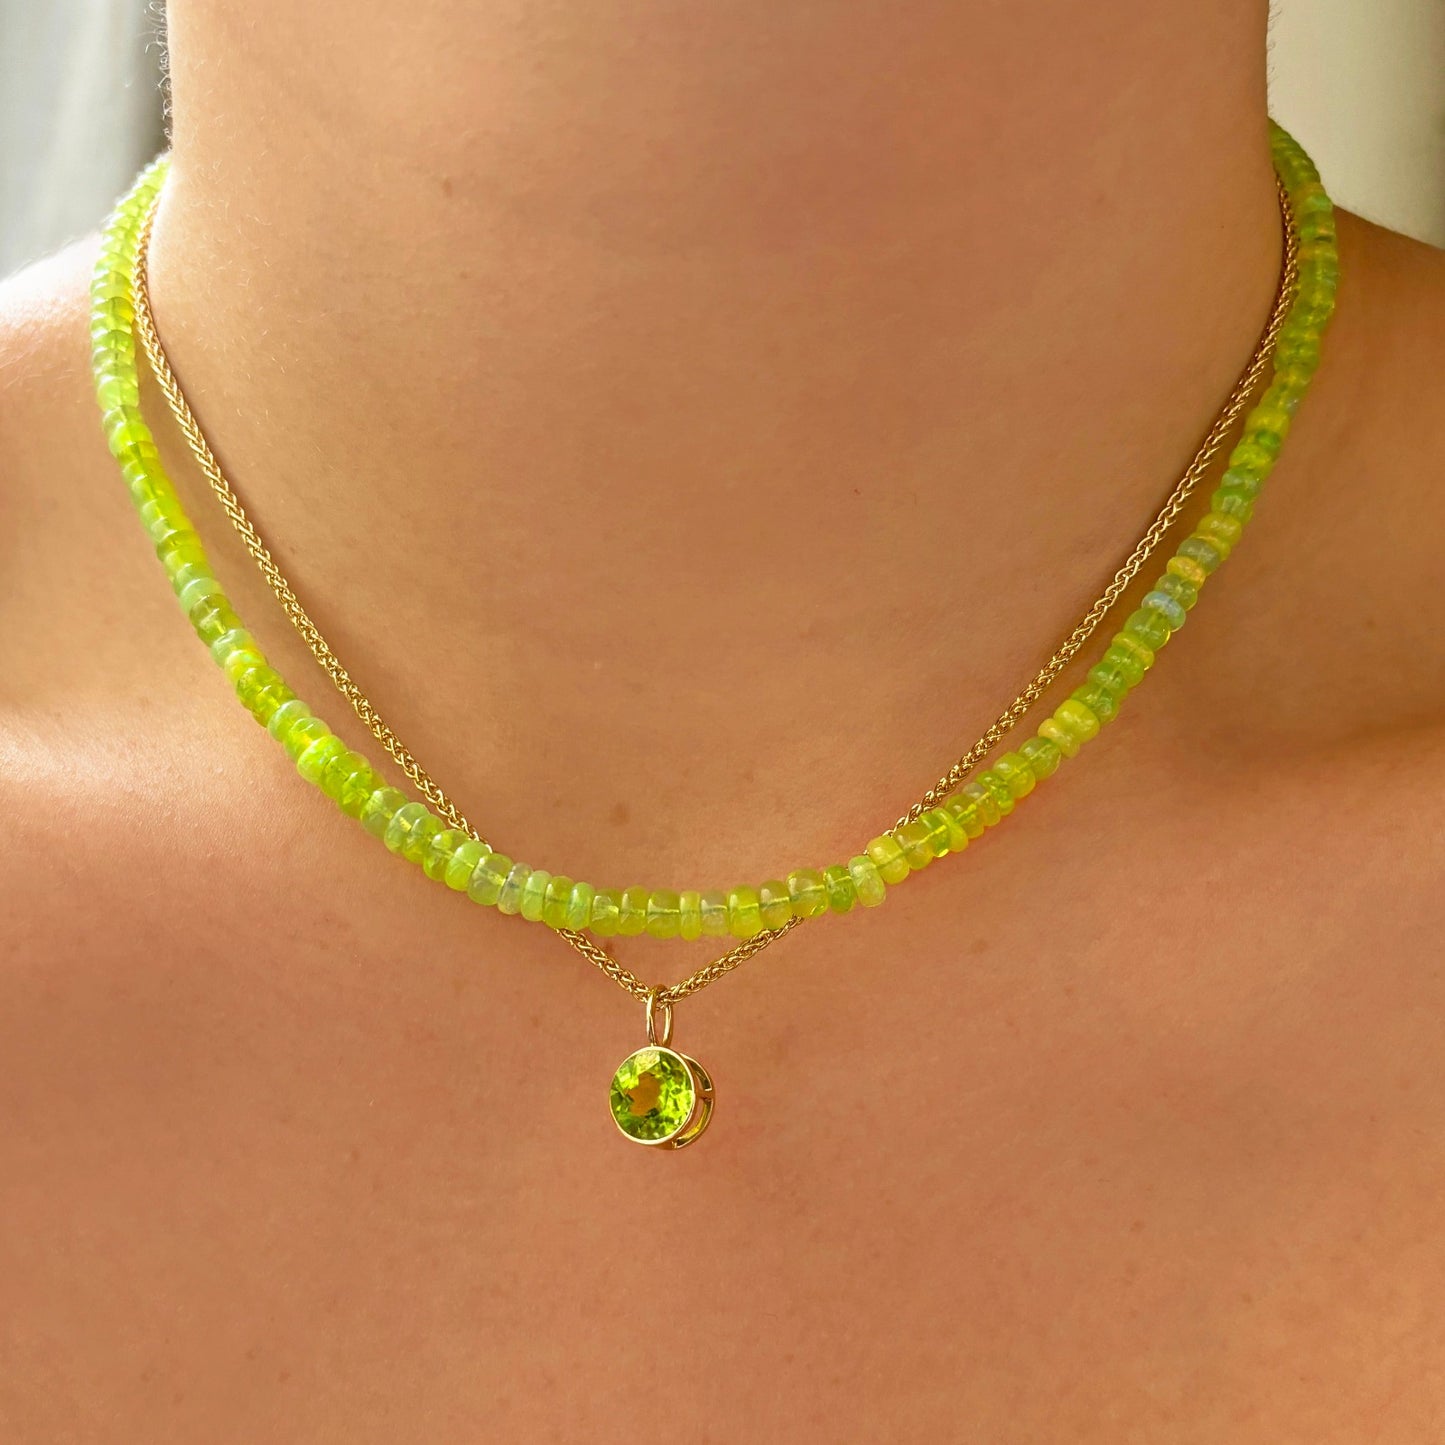 Shimmering beaded necklace made of smooth opal rondels in shades of yellow-green on a slim gold lobster clasp. Styled on a neck layered with the wheat chain necklace and round solitaire charm.